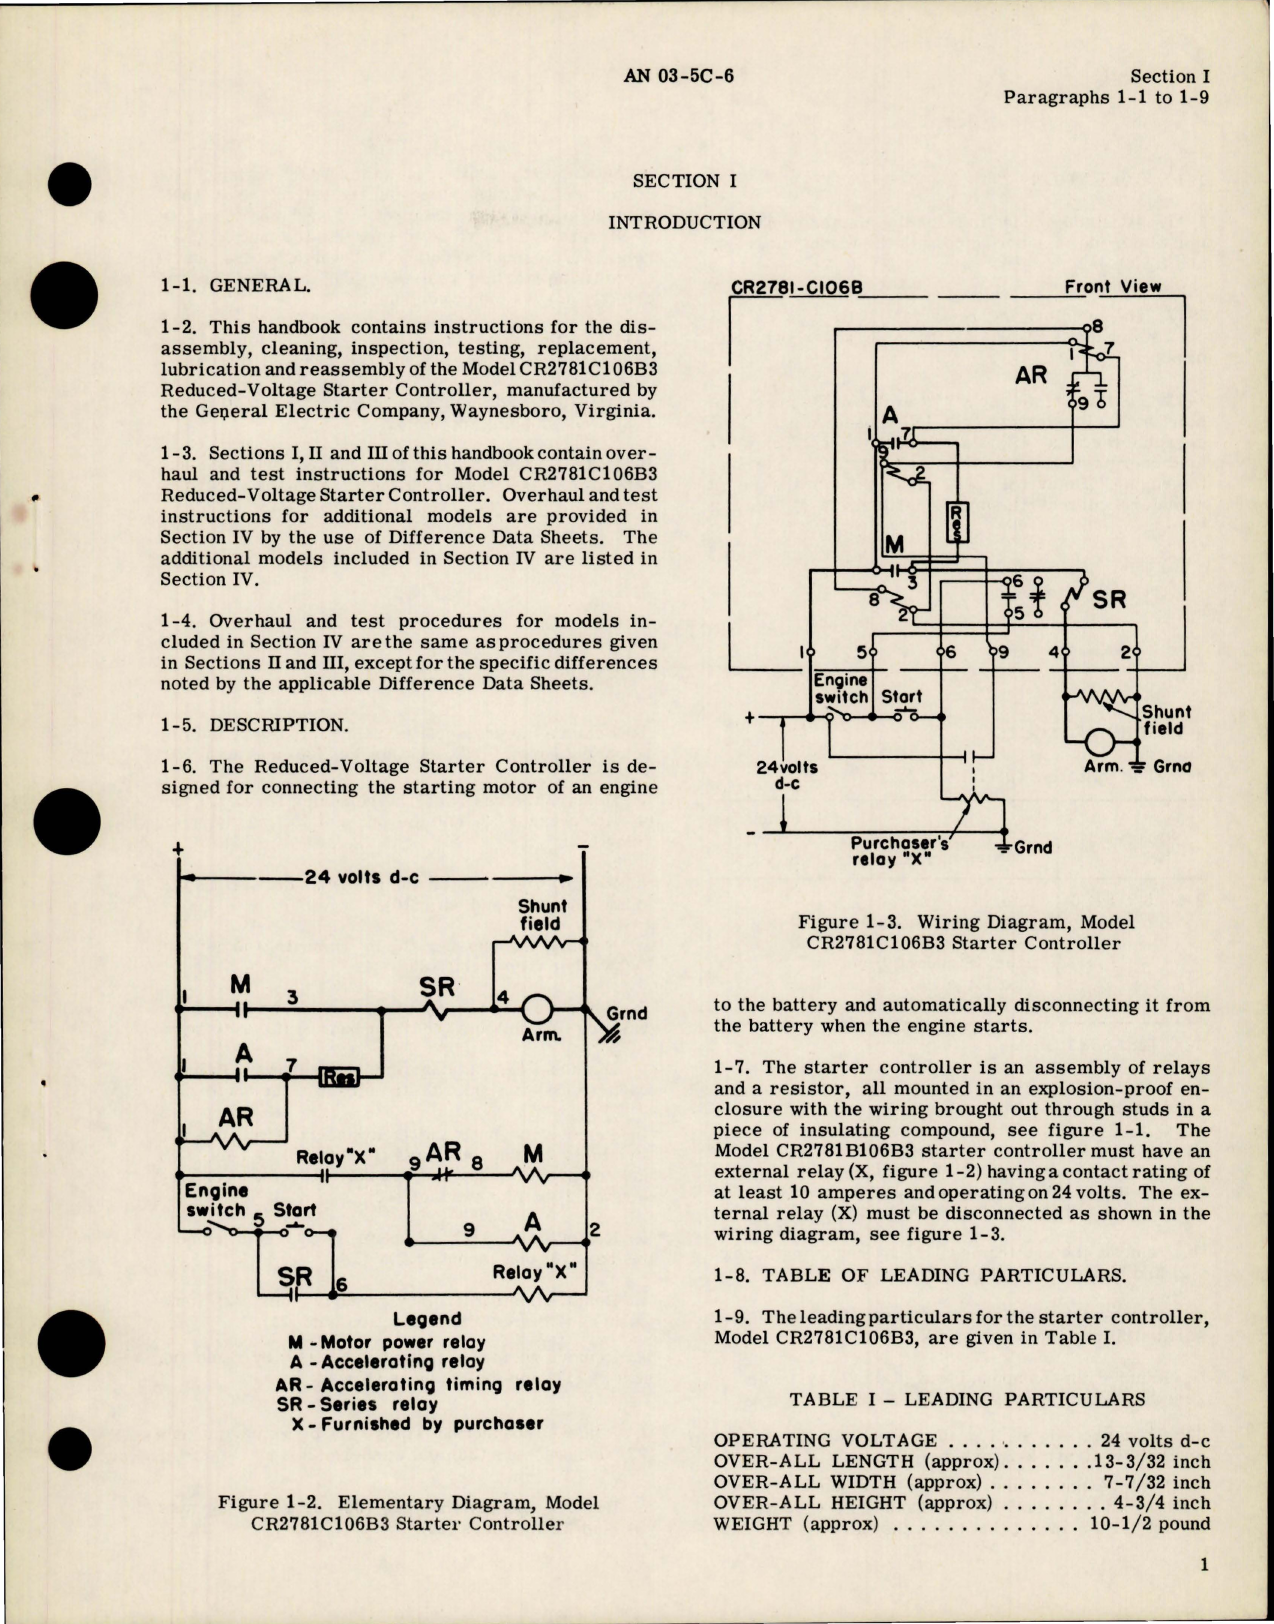 Sample page 5 from AirCorps Library document: Overhaul Instructions for Reduced Voltage Starter Controller 